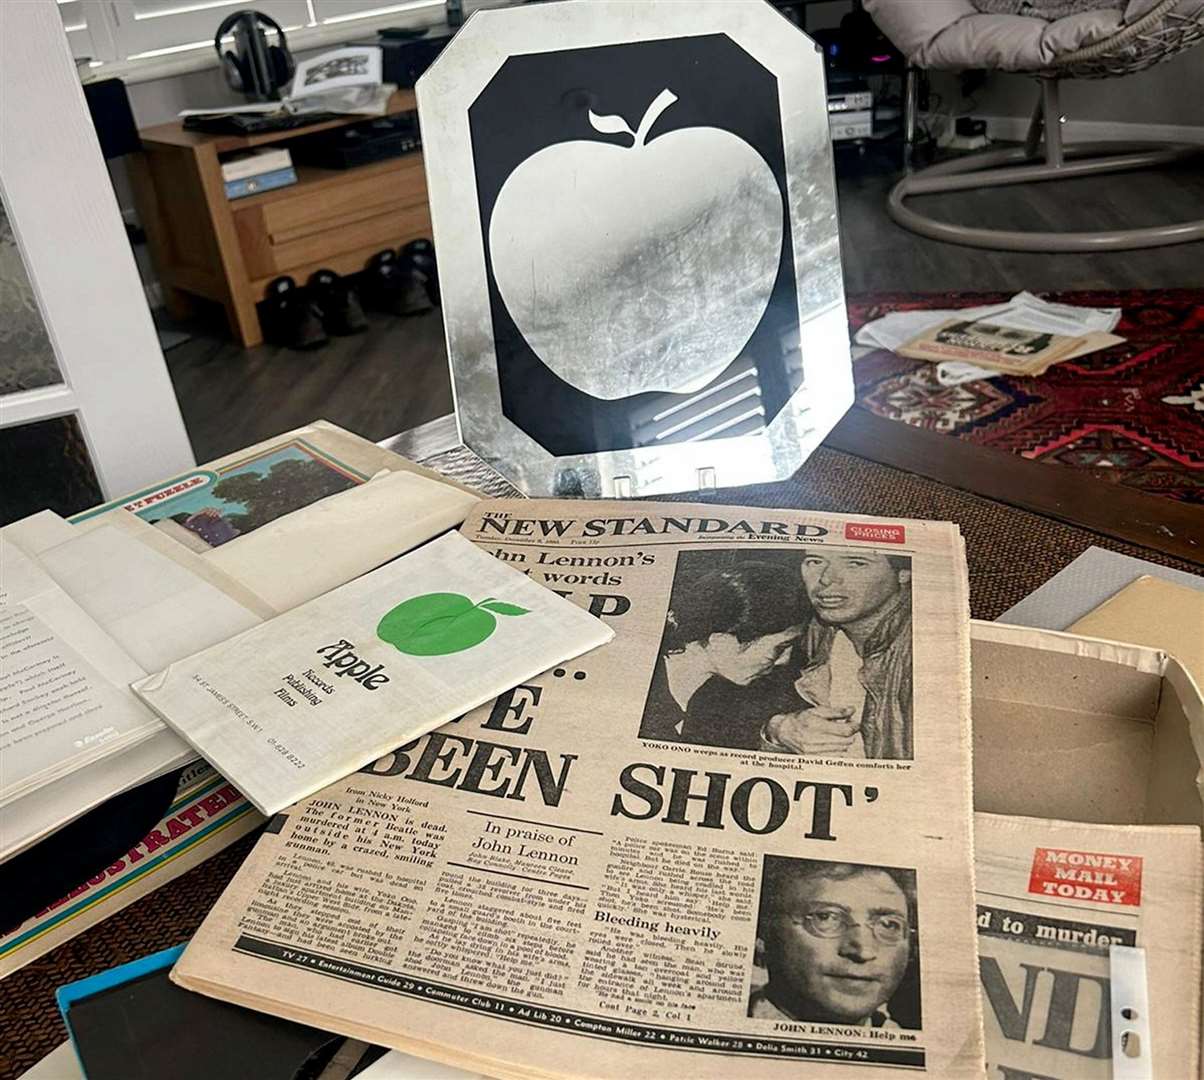 The 71-year-old has a collection of Beatles and Apple memorabilia. Picture: SWNS